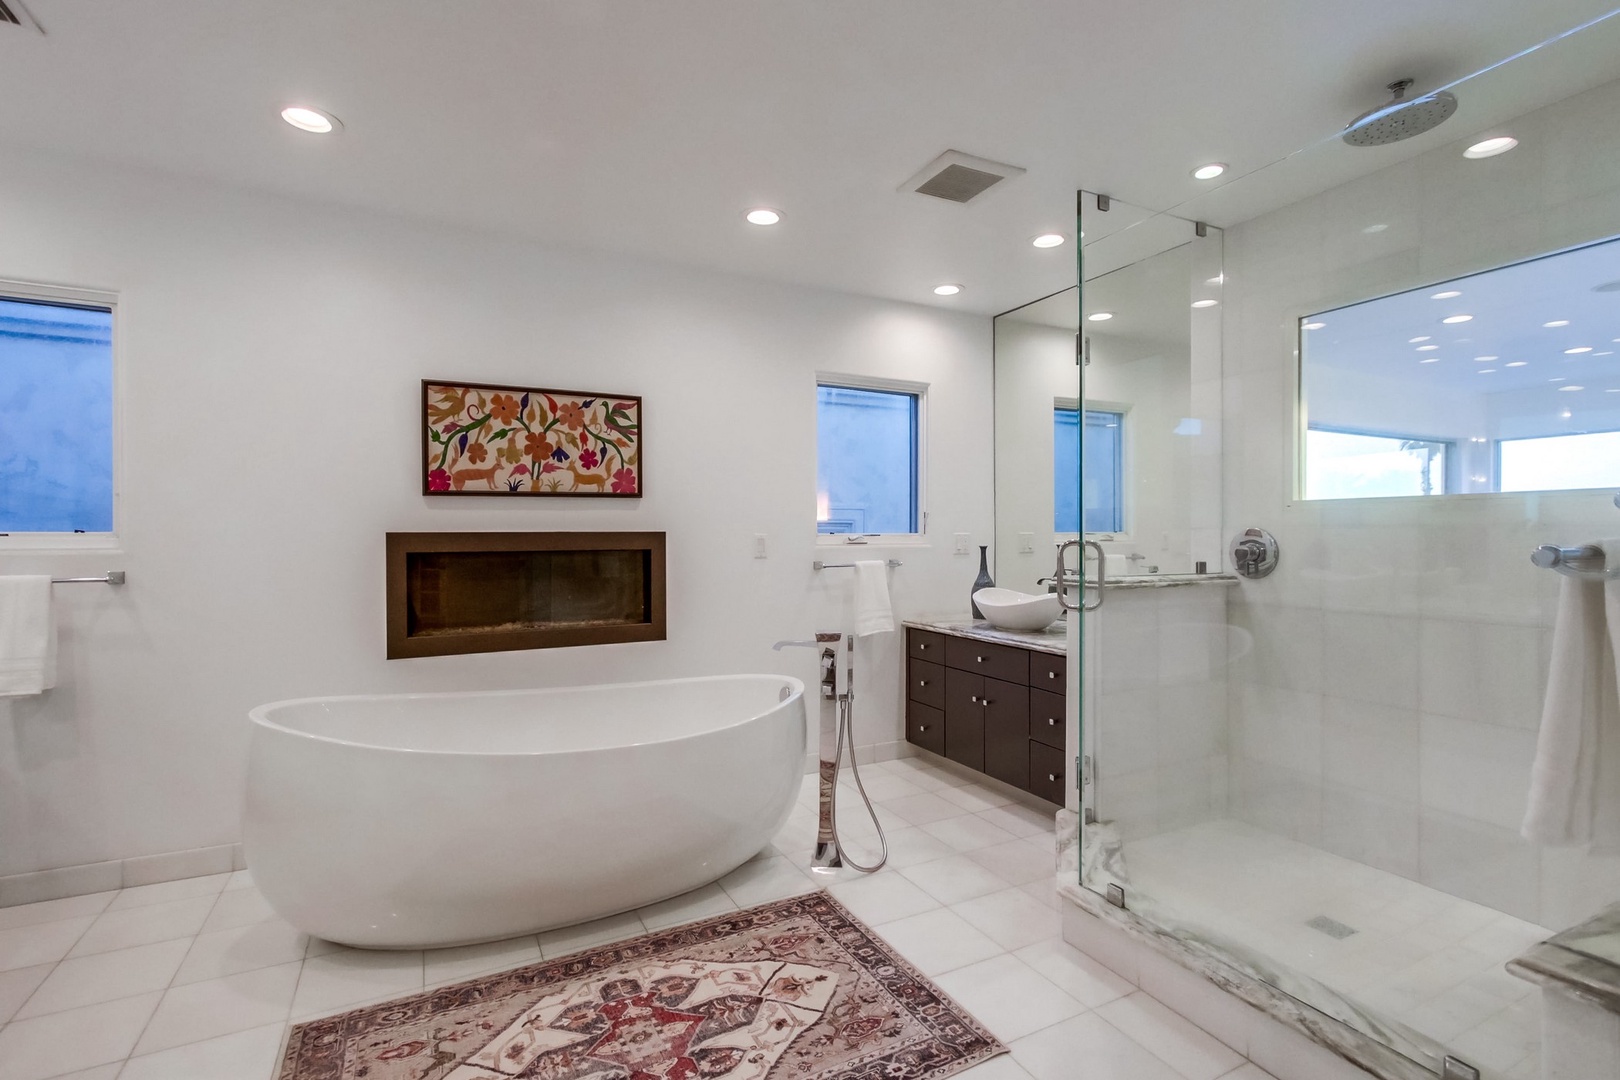 Primary Suite Bathroom with Shower and Soaking Tub